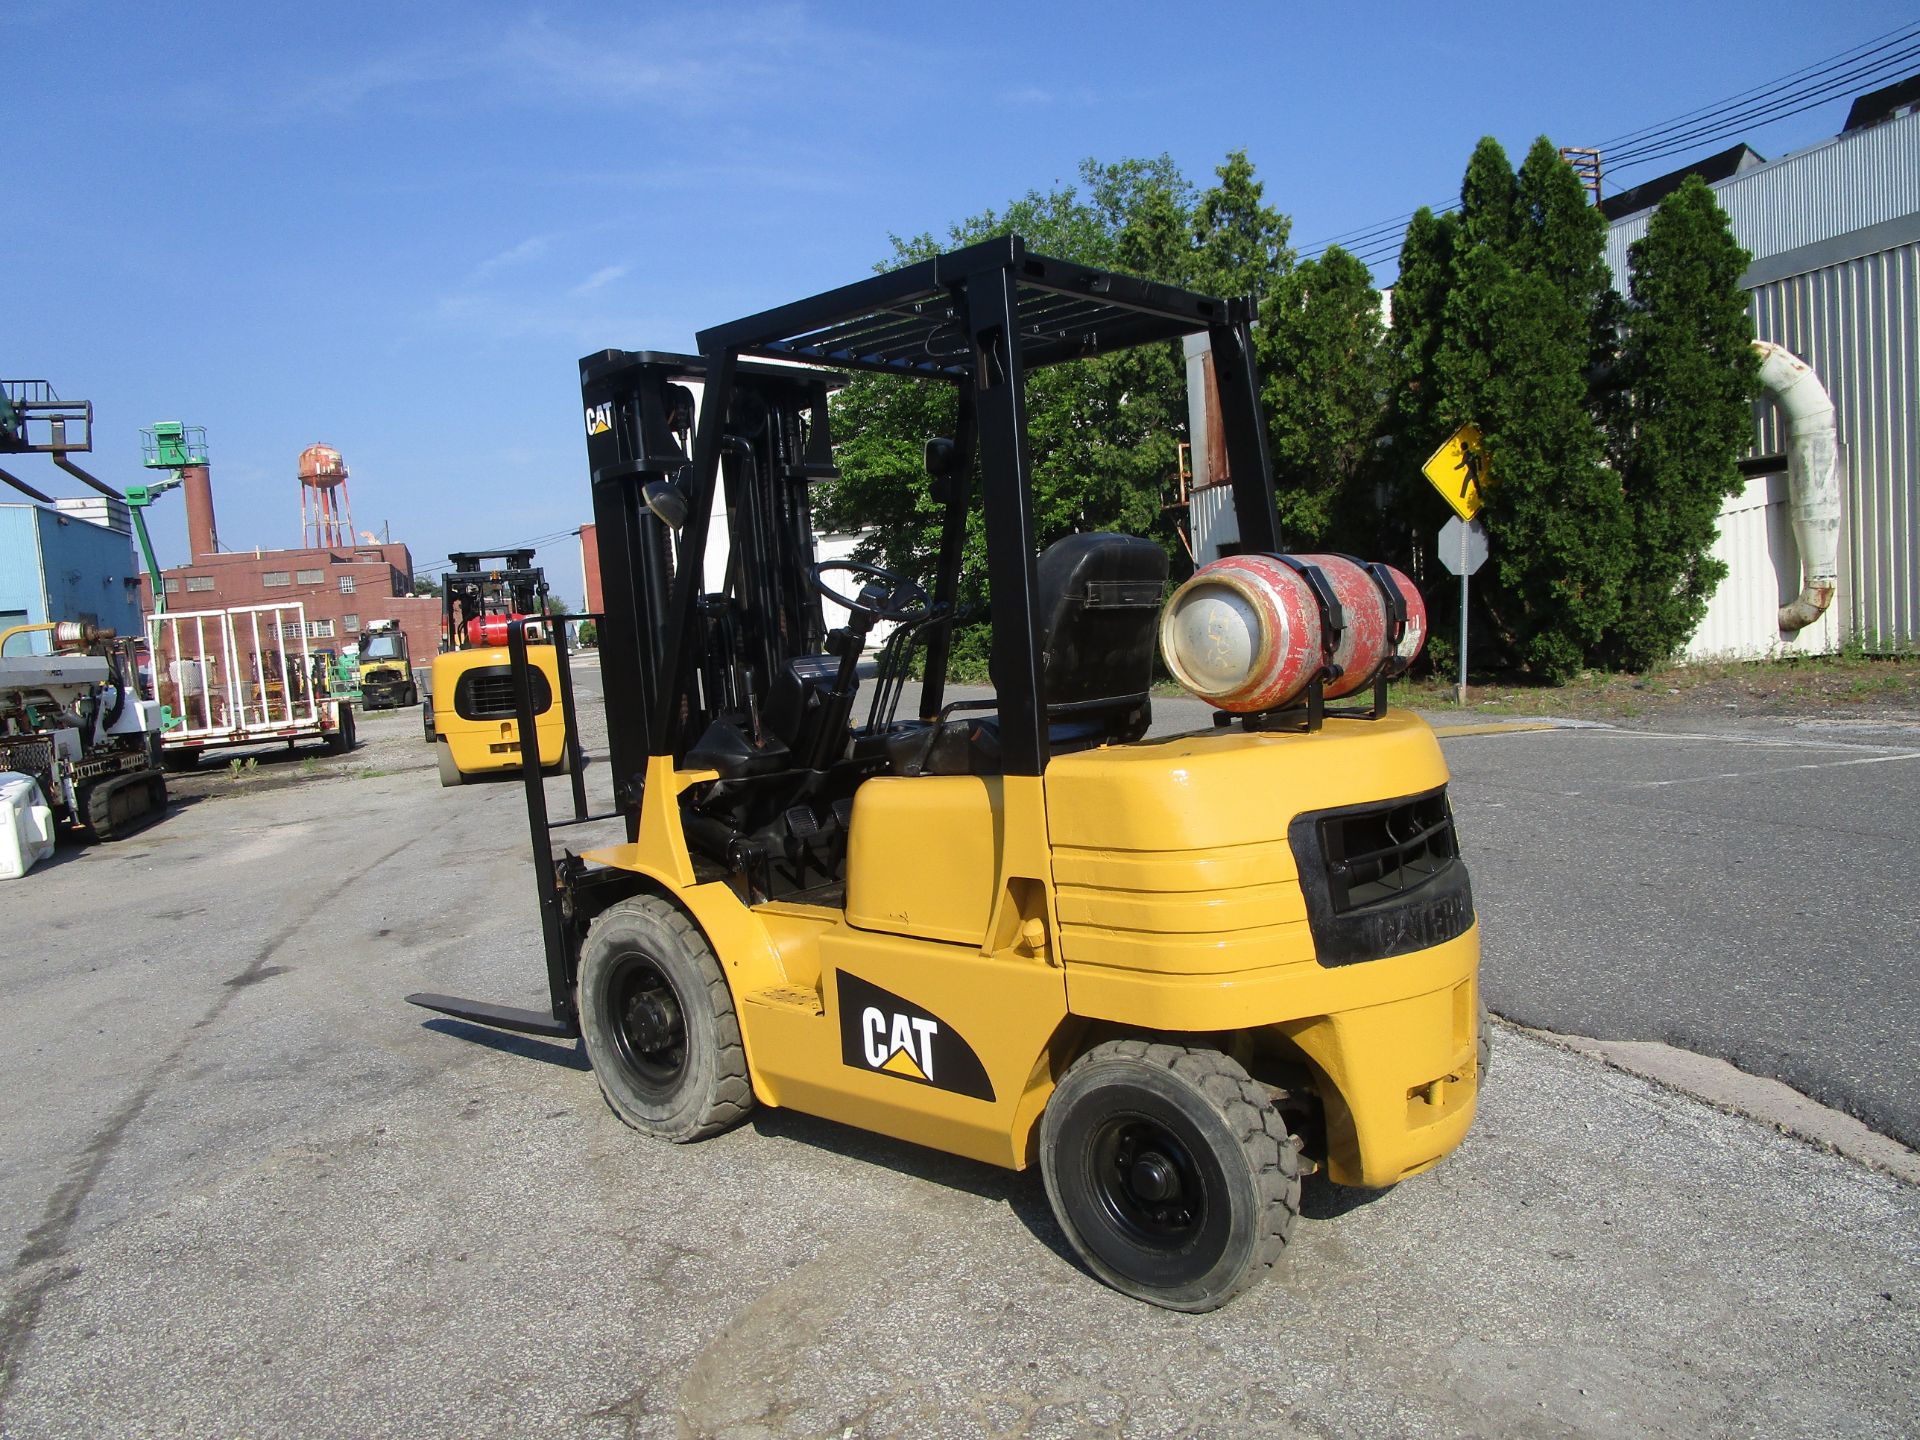 Caterpillar GP20 4,000lb Forklift - Located in Lester, PA - Image 2 of 9